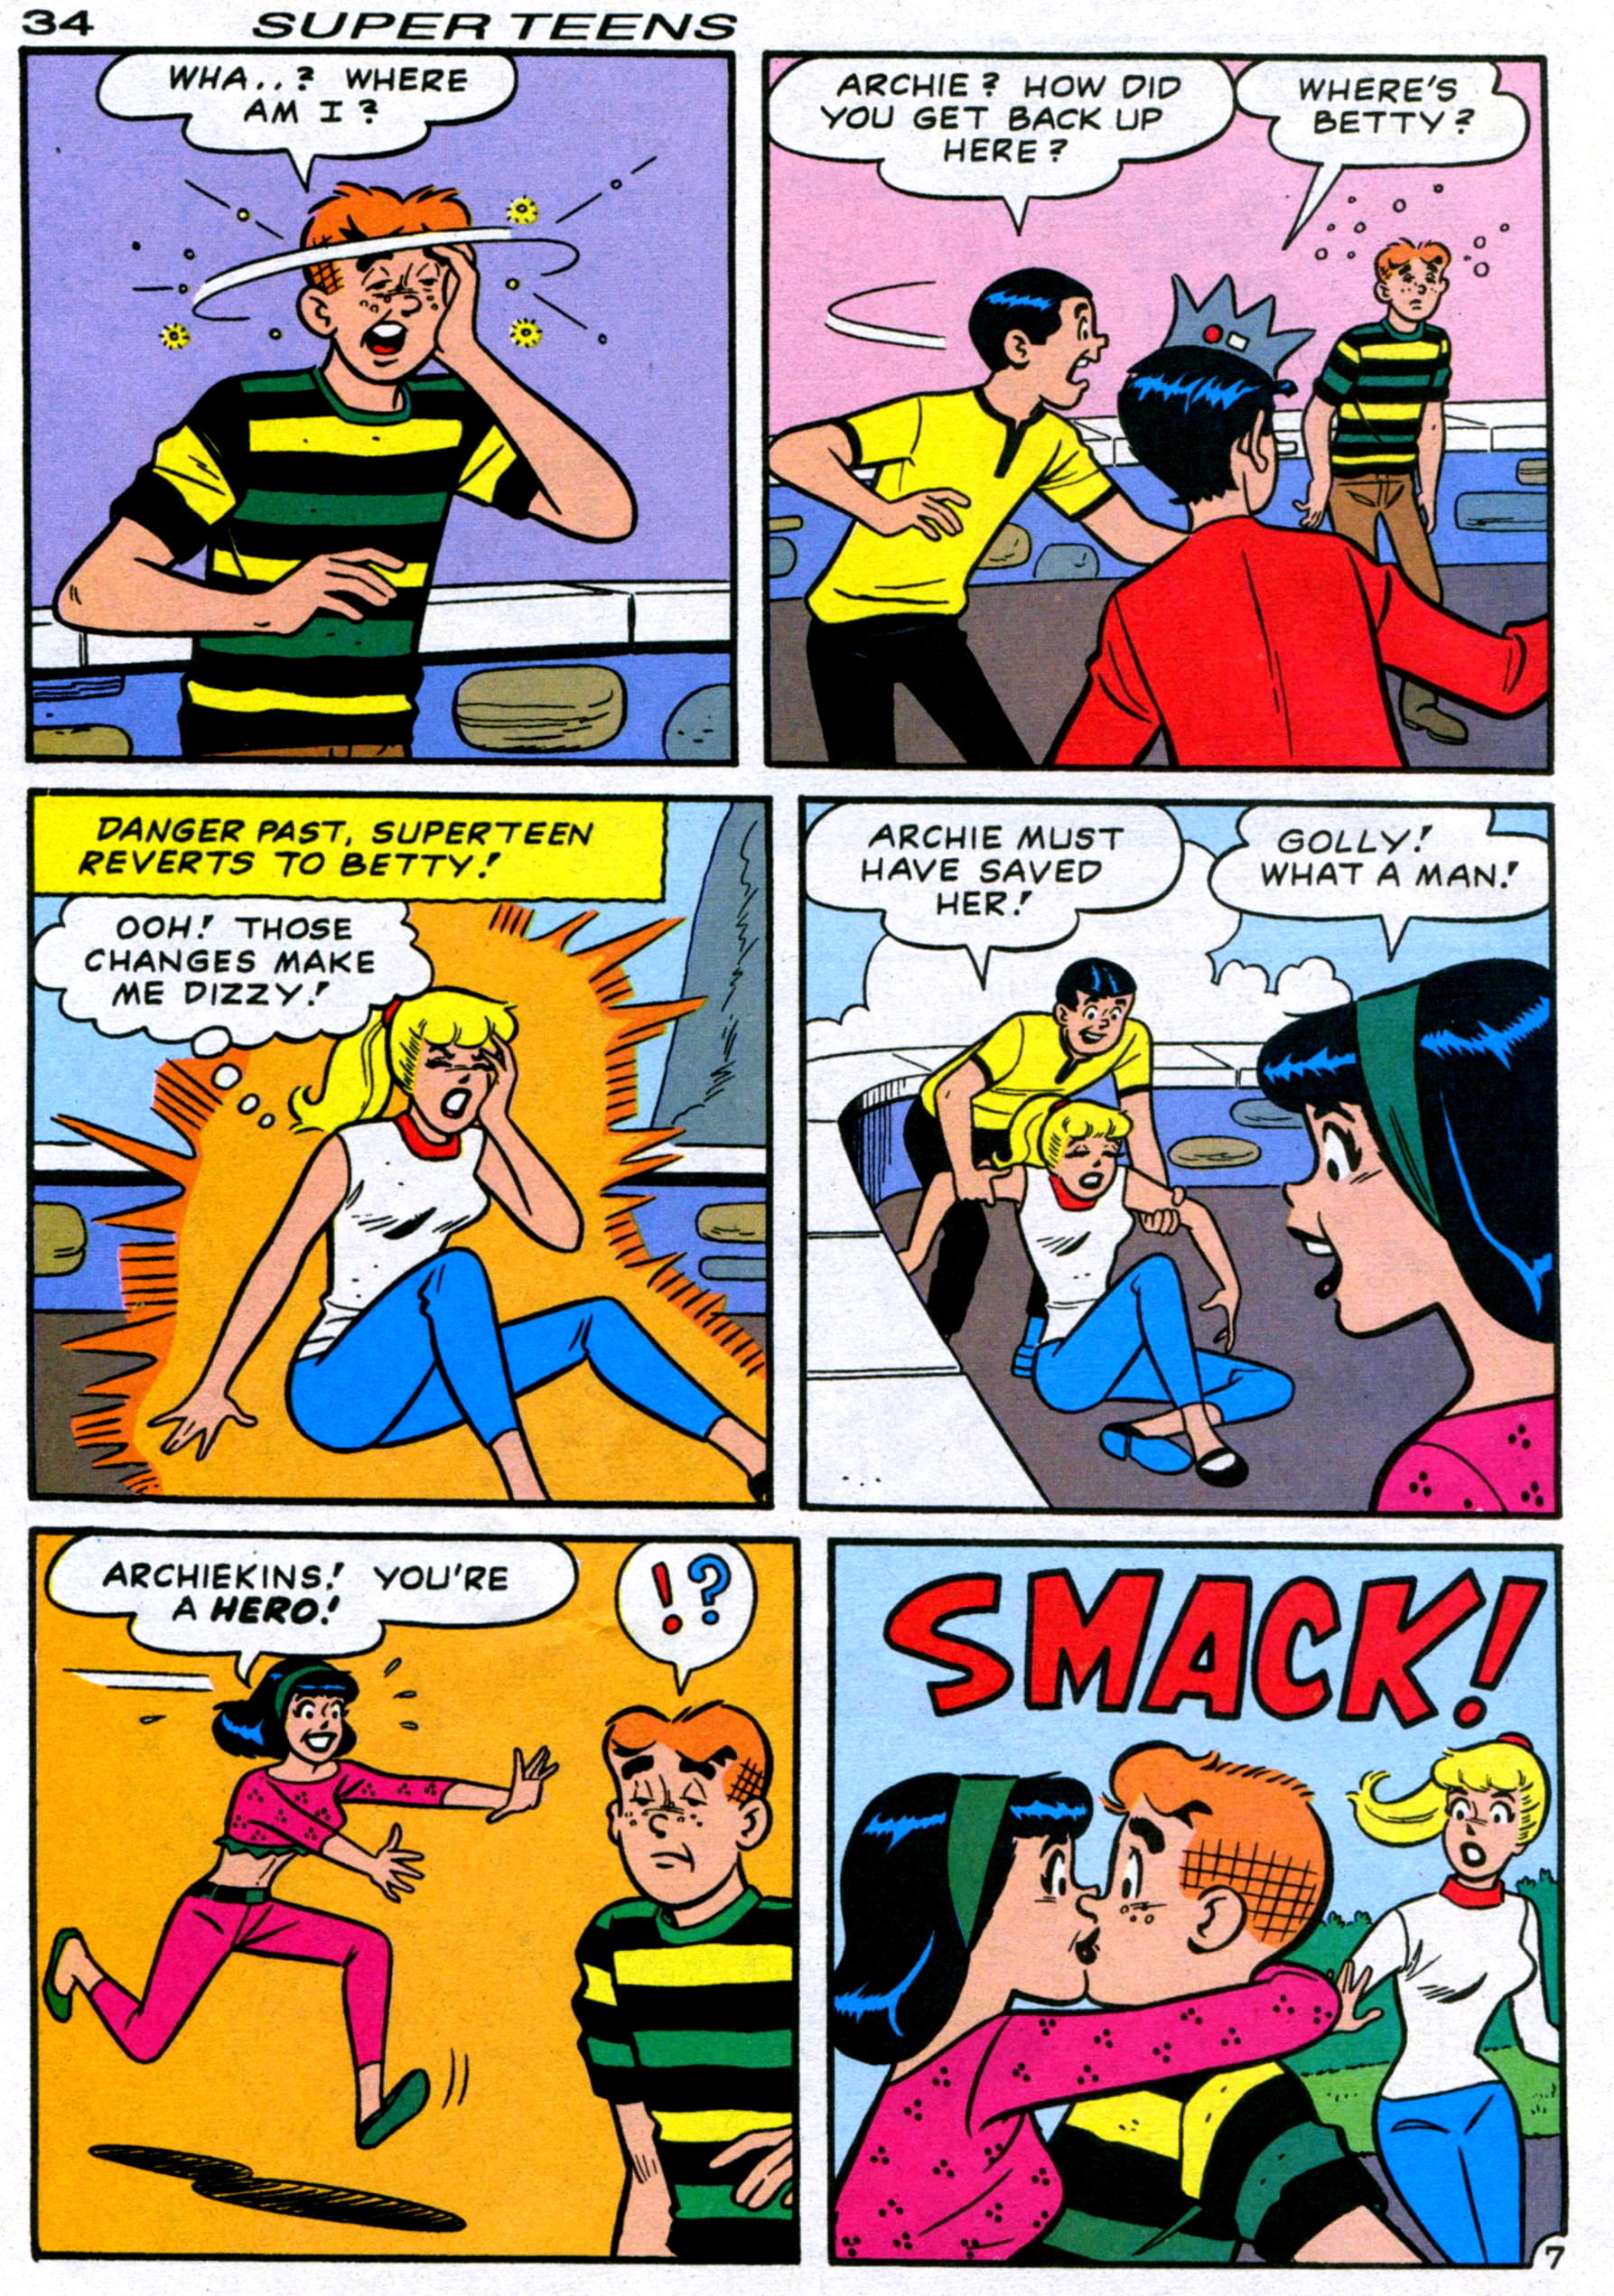 Read online Archie's Super Teens comic -  Issue #1 - 36